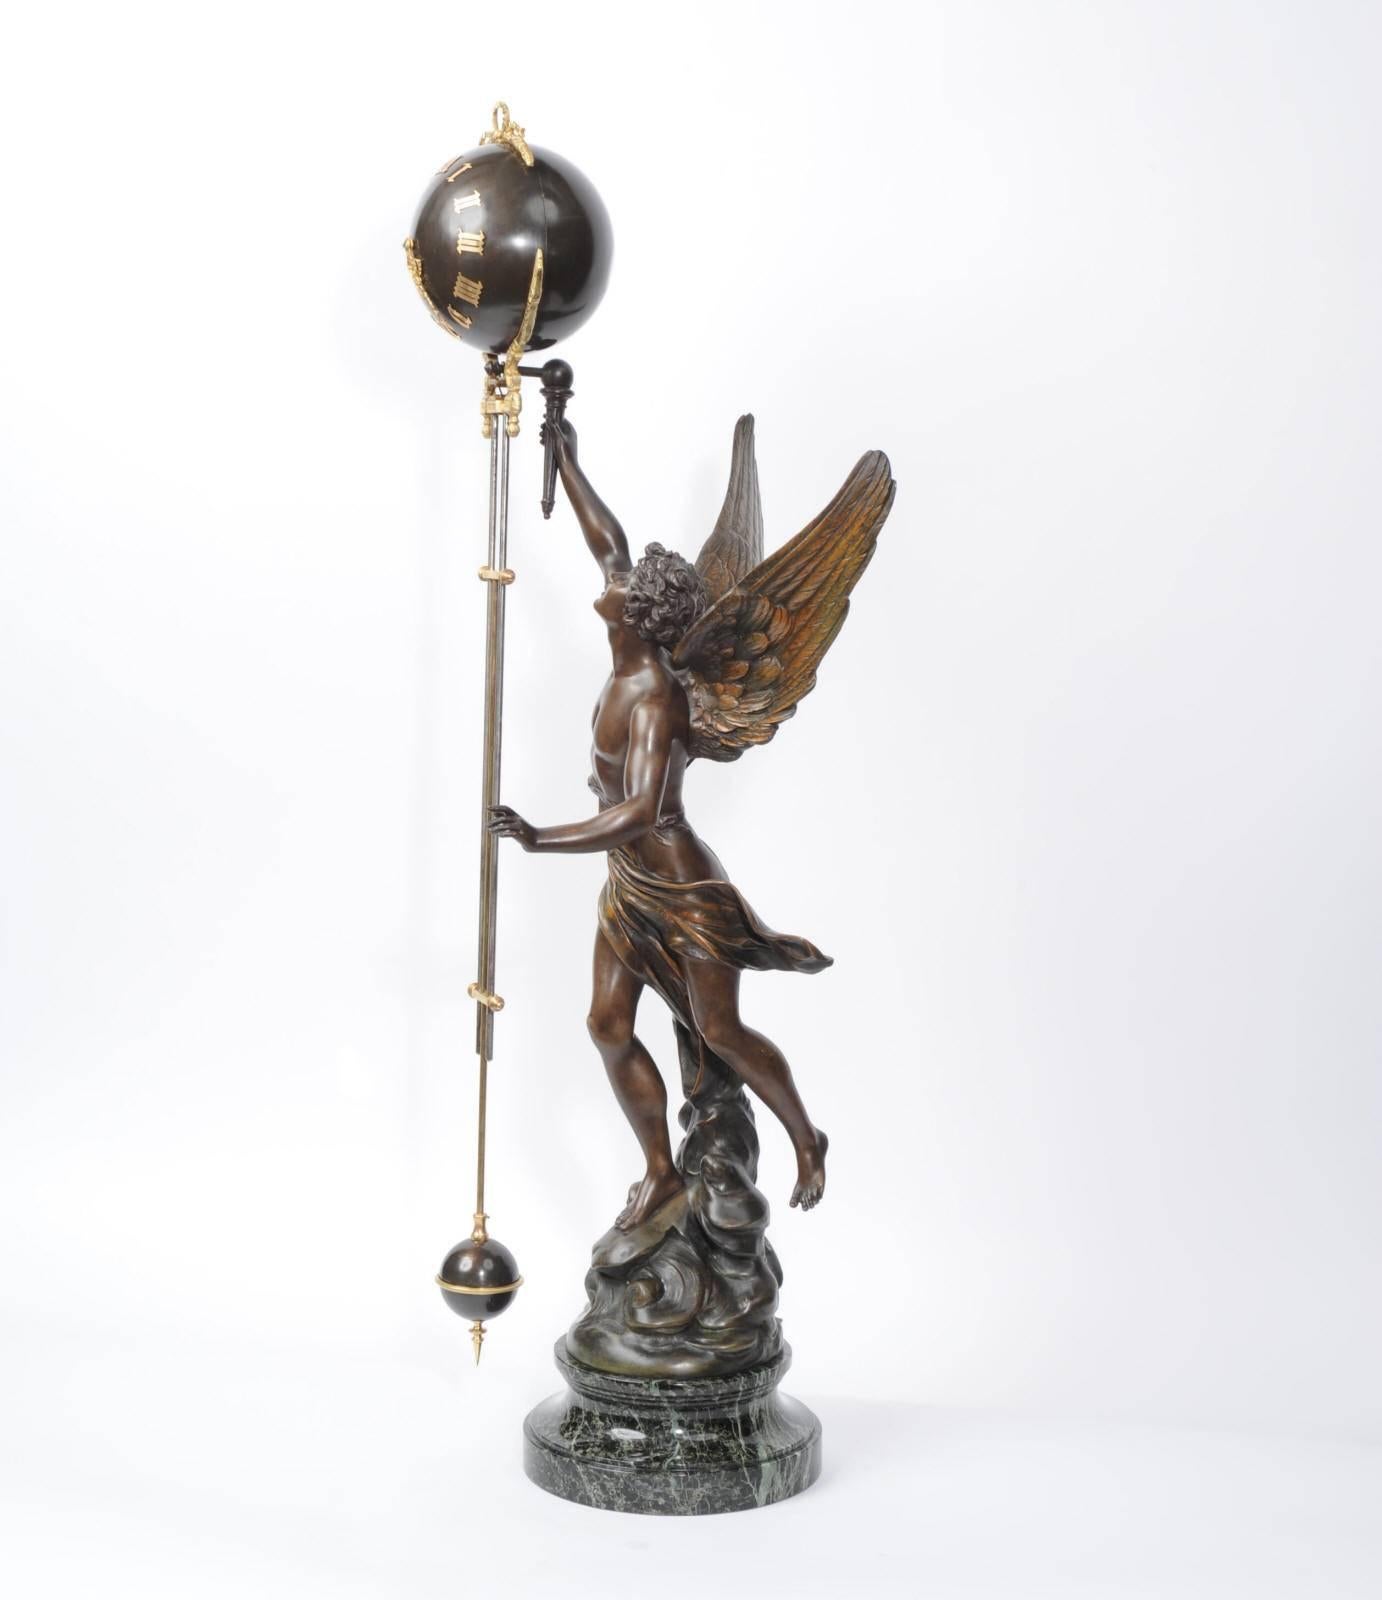 19th Century Large Swinging Mystery Clock La Victoire by Émile Bruchon French, circa 1890